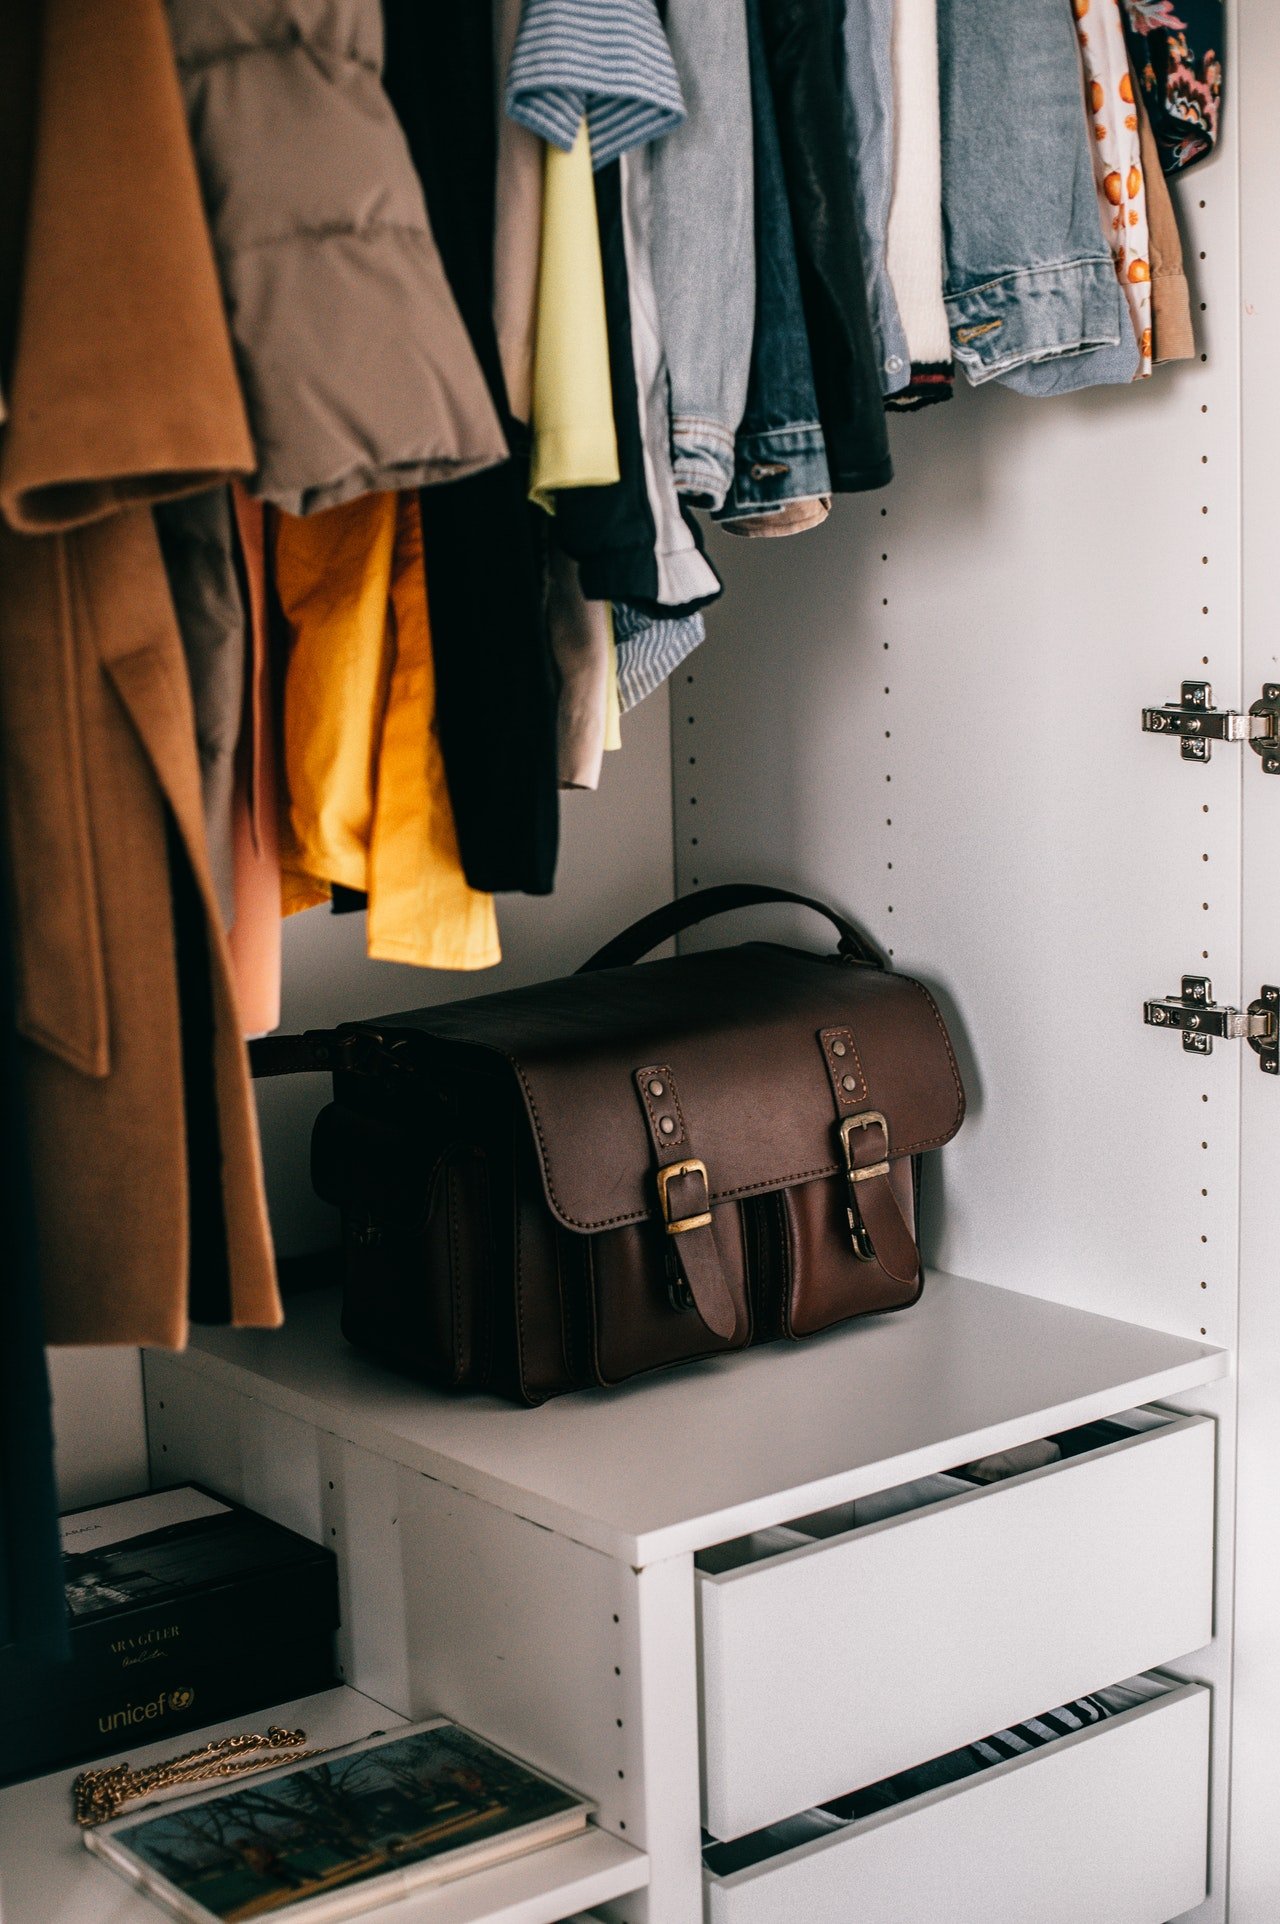 I noticed something odd in my closet. | Source: Pexels